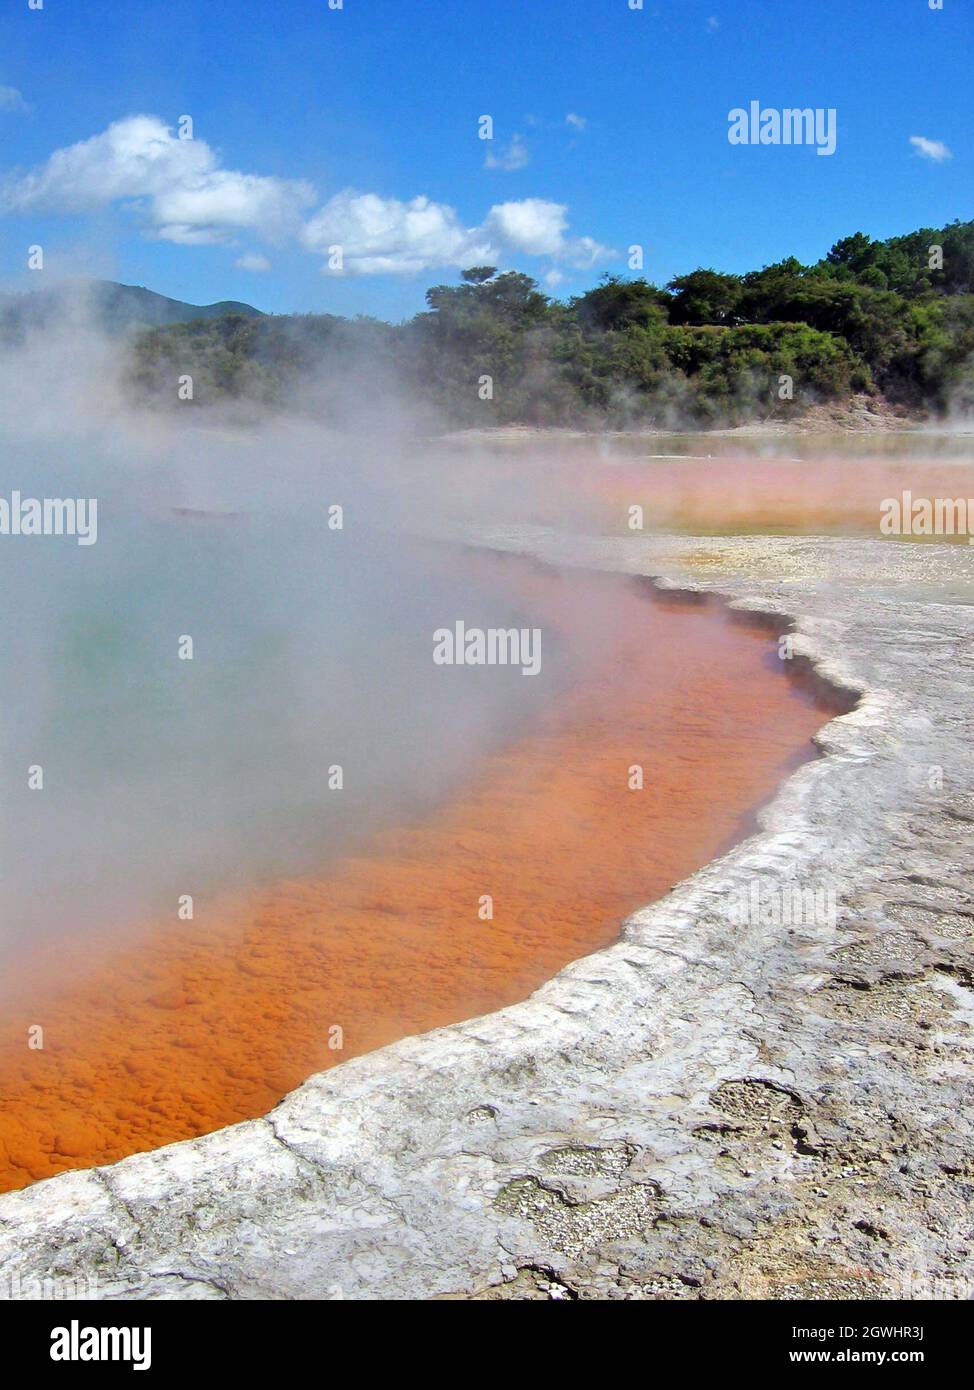 Mineral deposit build up along the Champagne Pool in Wai-O-Tapu on the north island of New Zealand.  The geothermal landscape is part of the Taupo Volcanic Zone while located inside Okataina Volcanic Center. Stock Photo